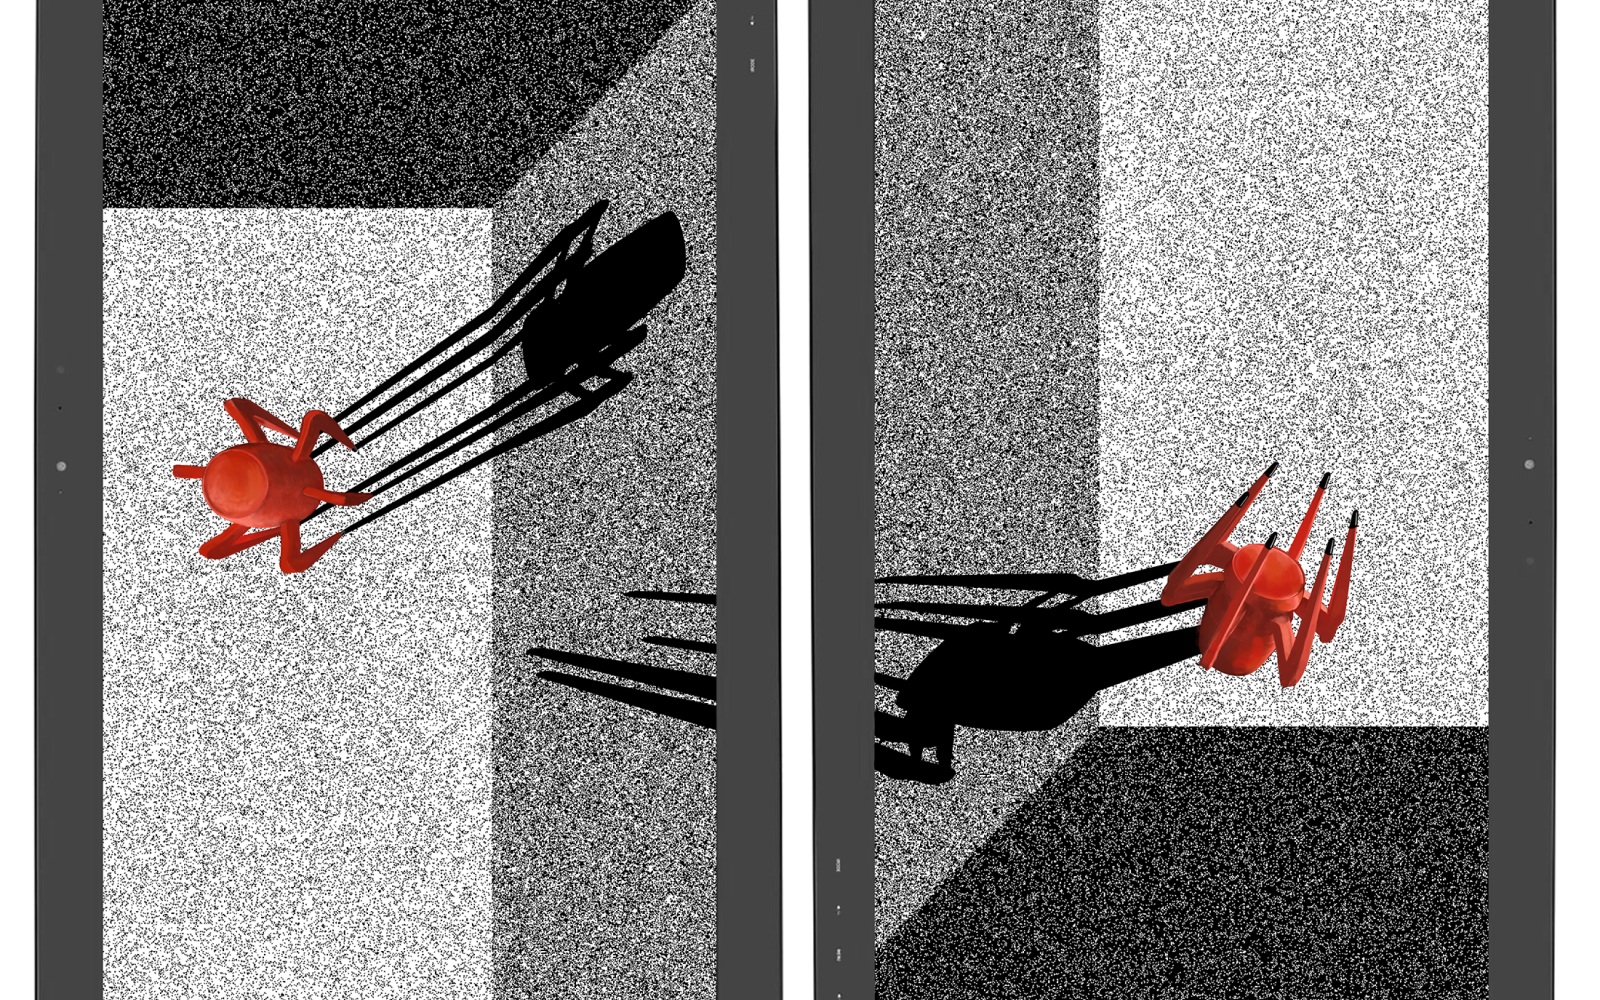 Two rectangular drawings in different shades of grey with a spider-like red figure cast a large shadow 